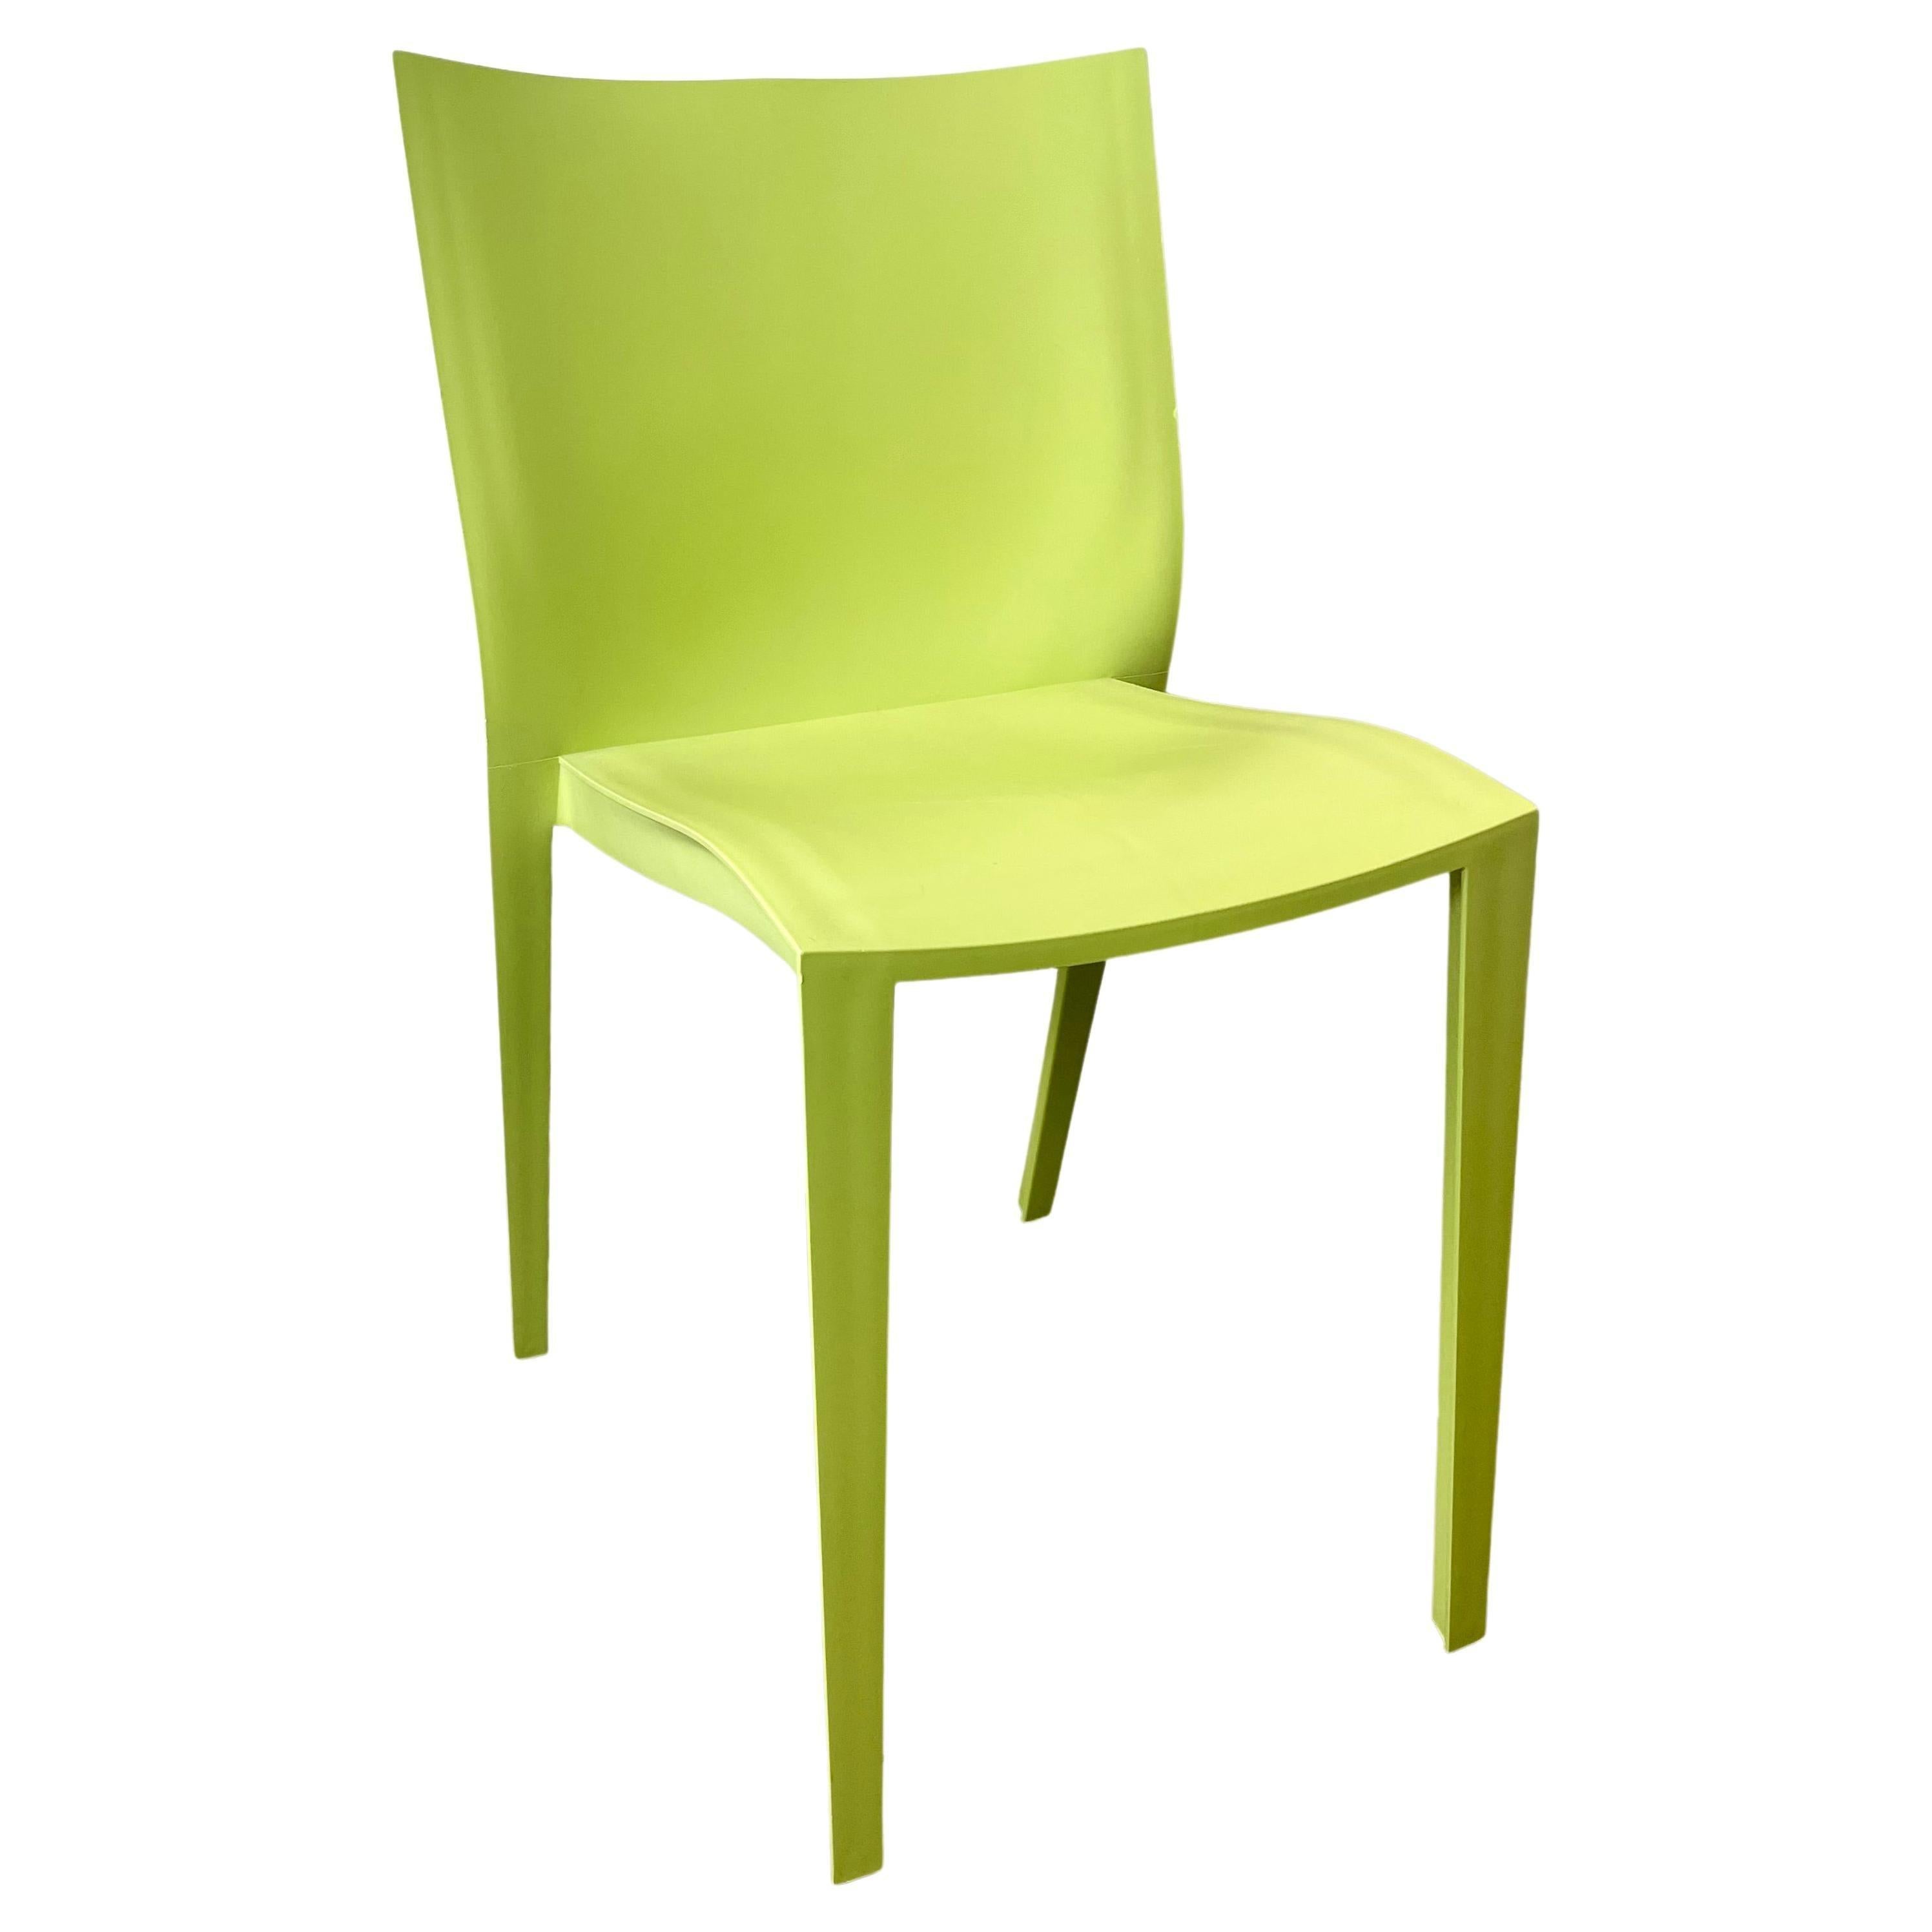 Philippe Starck, Set of 2 French Green Chairs, Design Slick Slick XO - France In Good Condition For Sale In Beuzevillette, FR